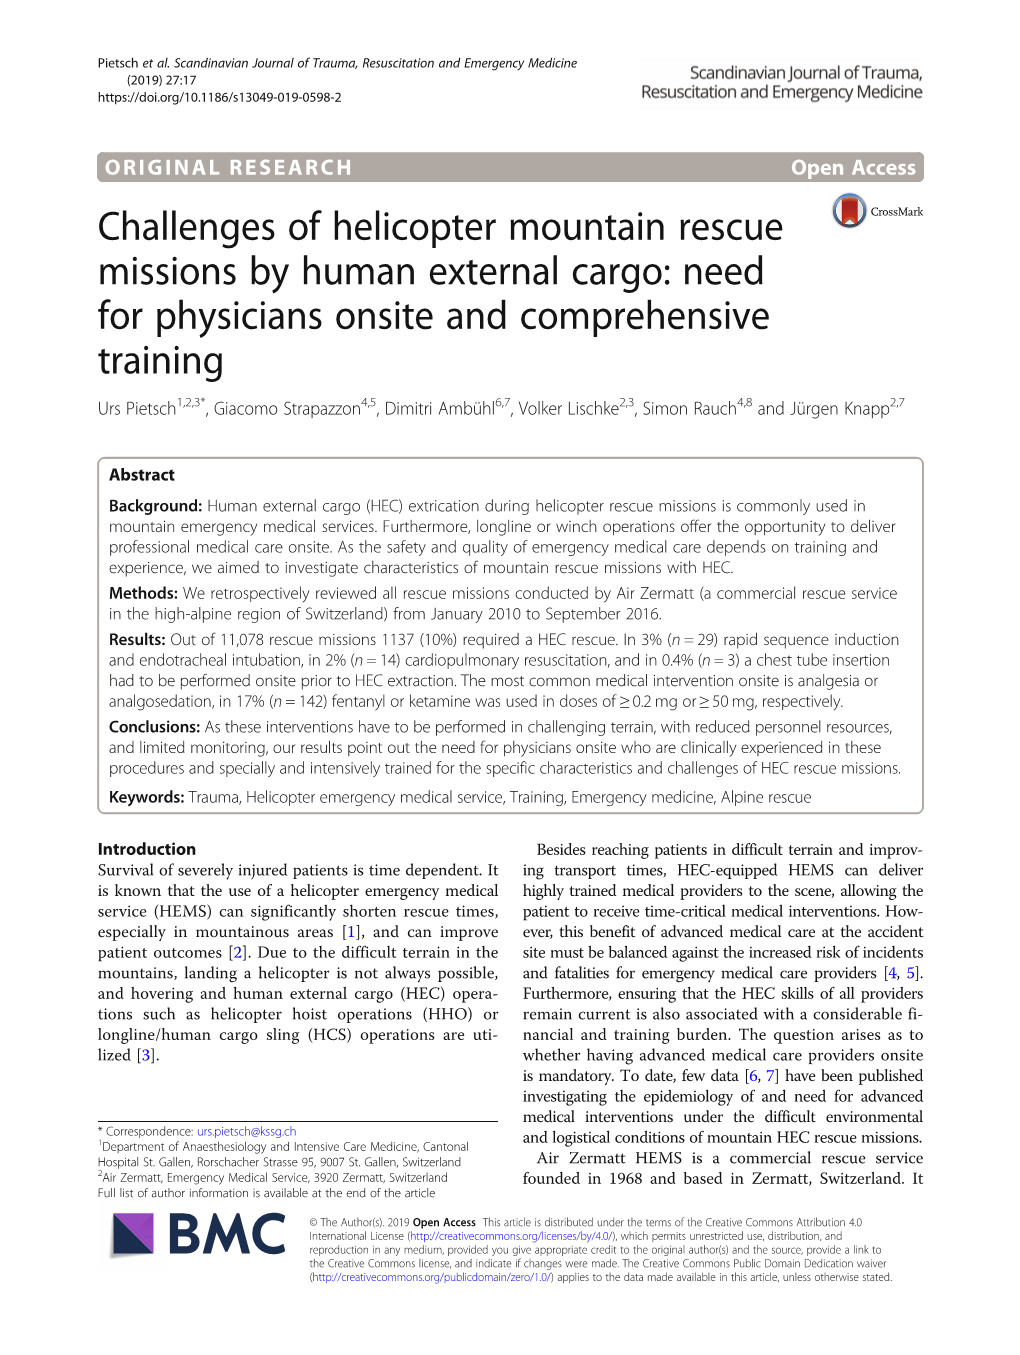 Challenges of Helicopter Mountain Rescue Missions by Human External